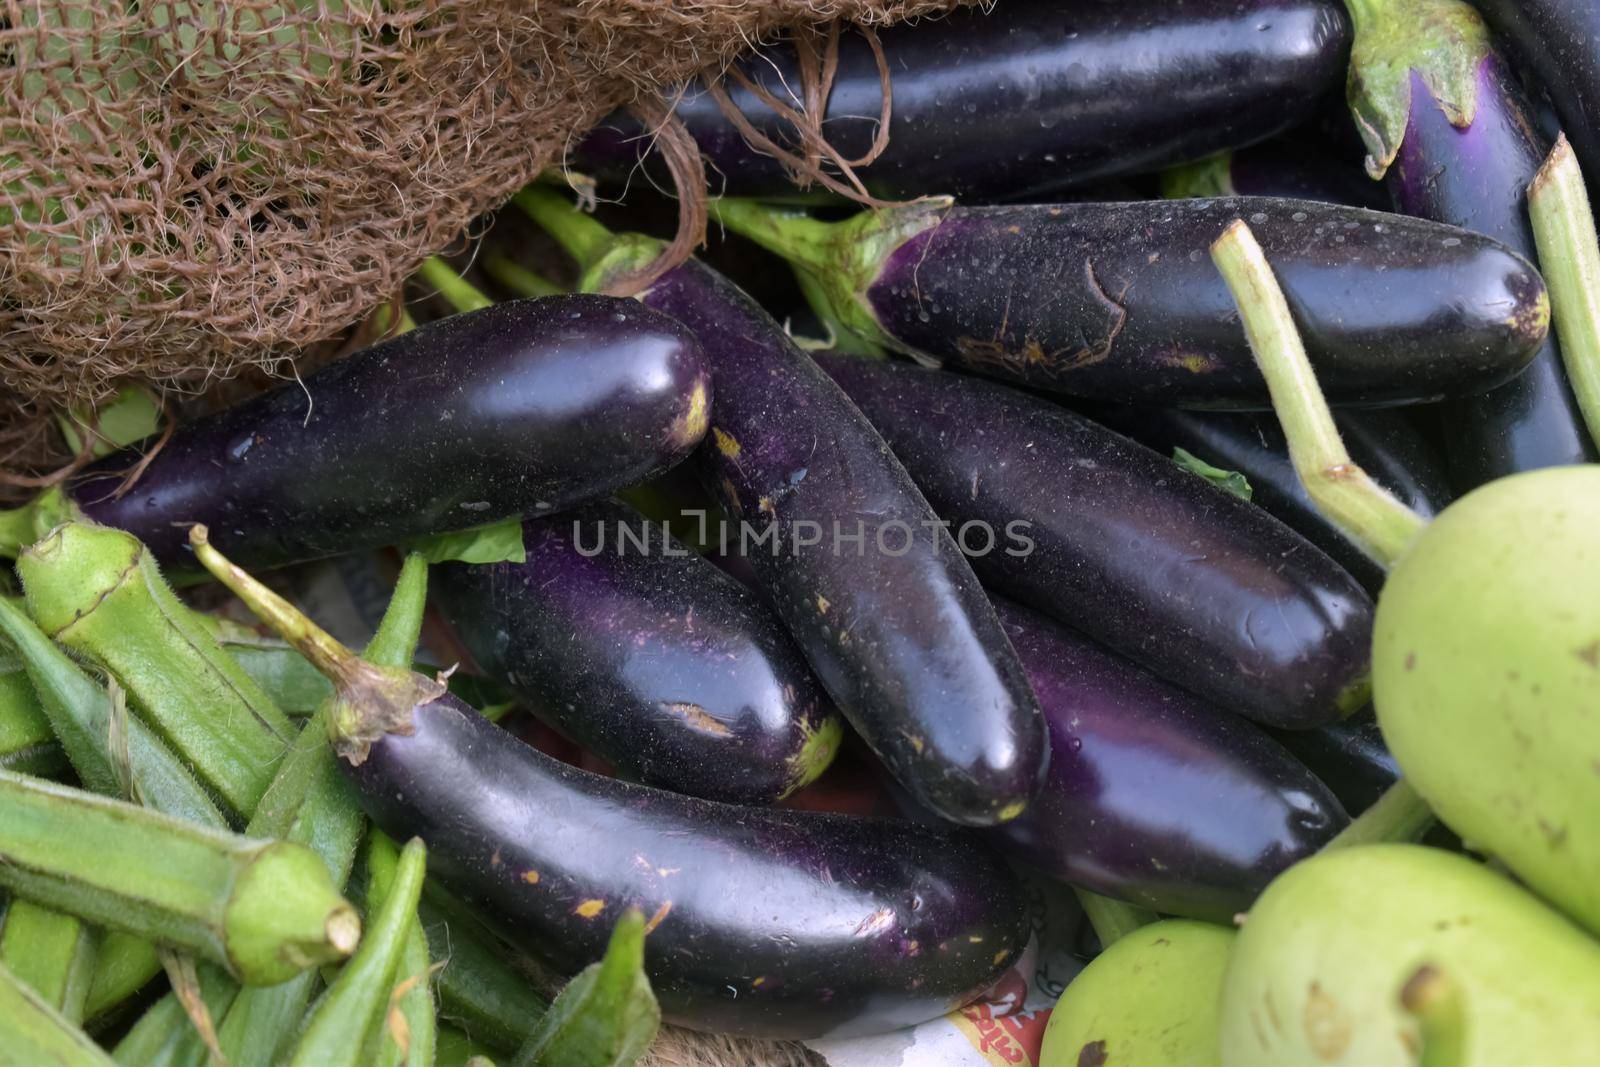 A closeup shot of a pile of fresh eggplants in a market place